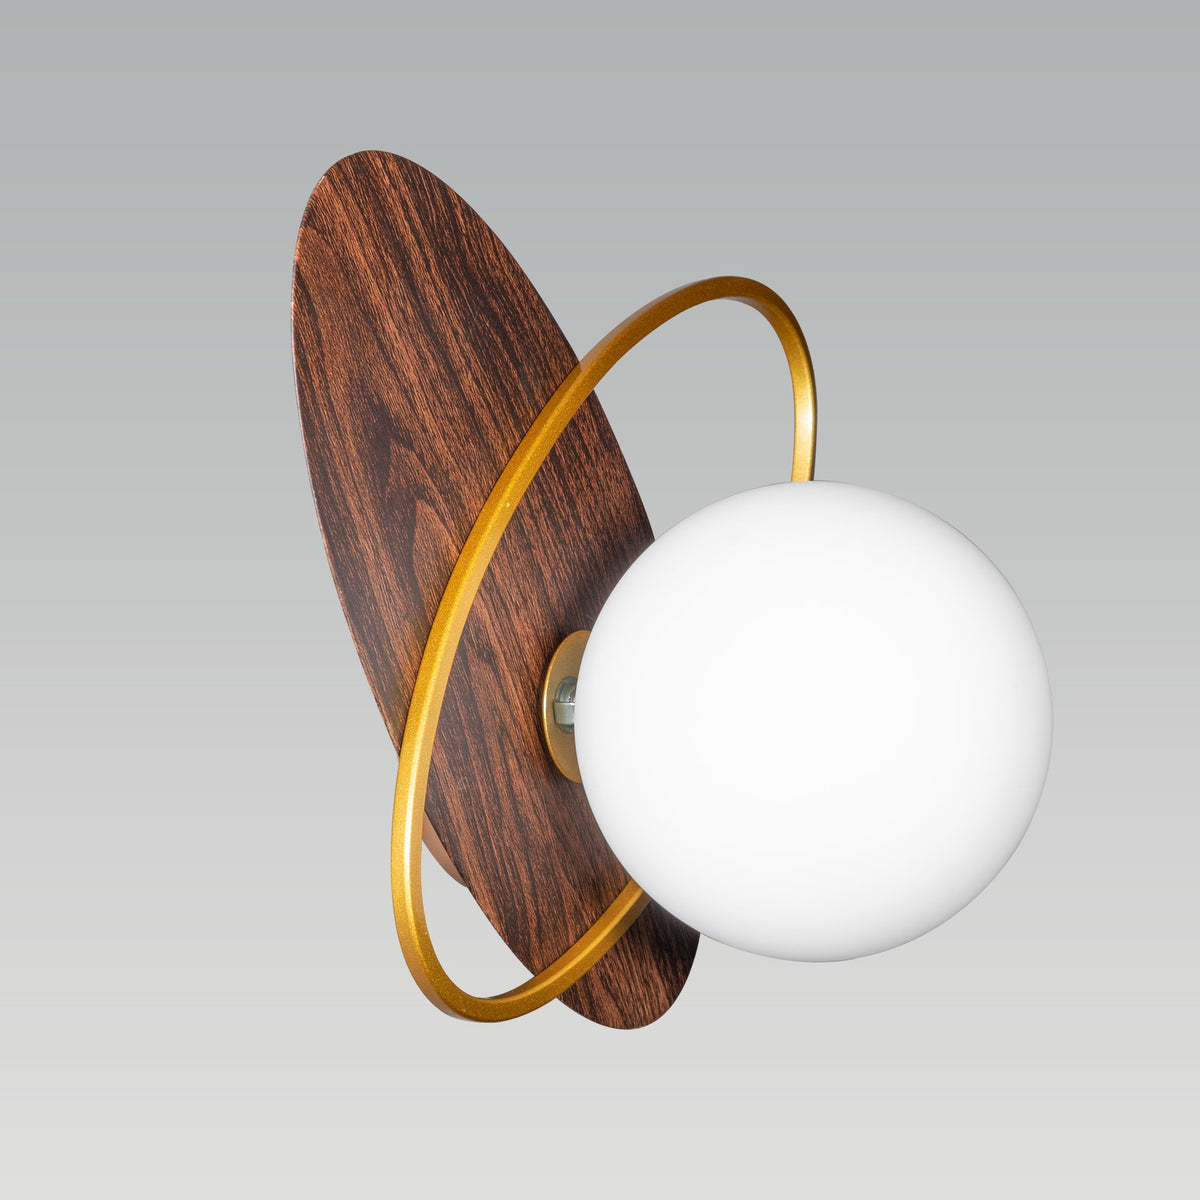 Shop Woody LED Wall Light online